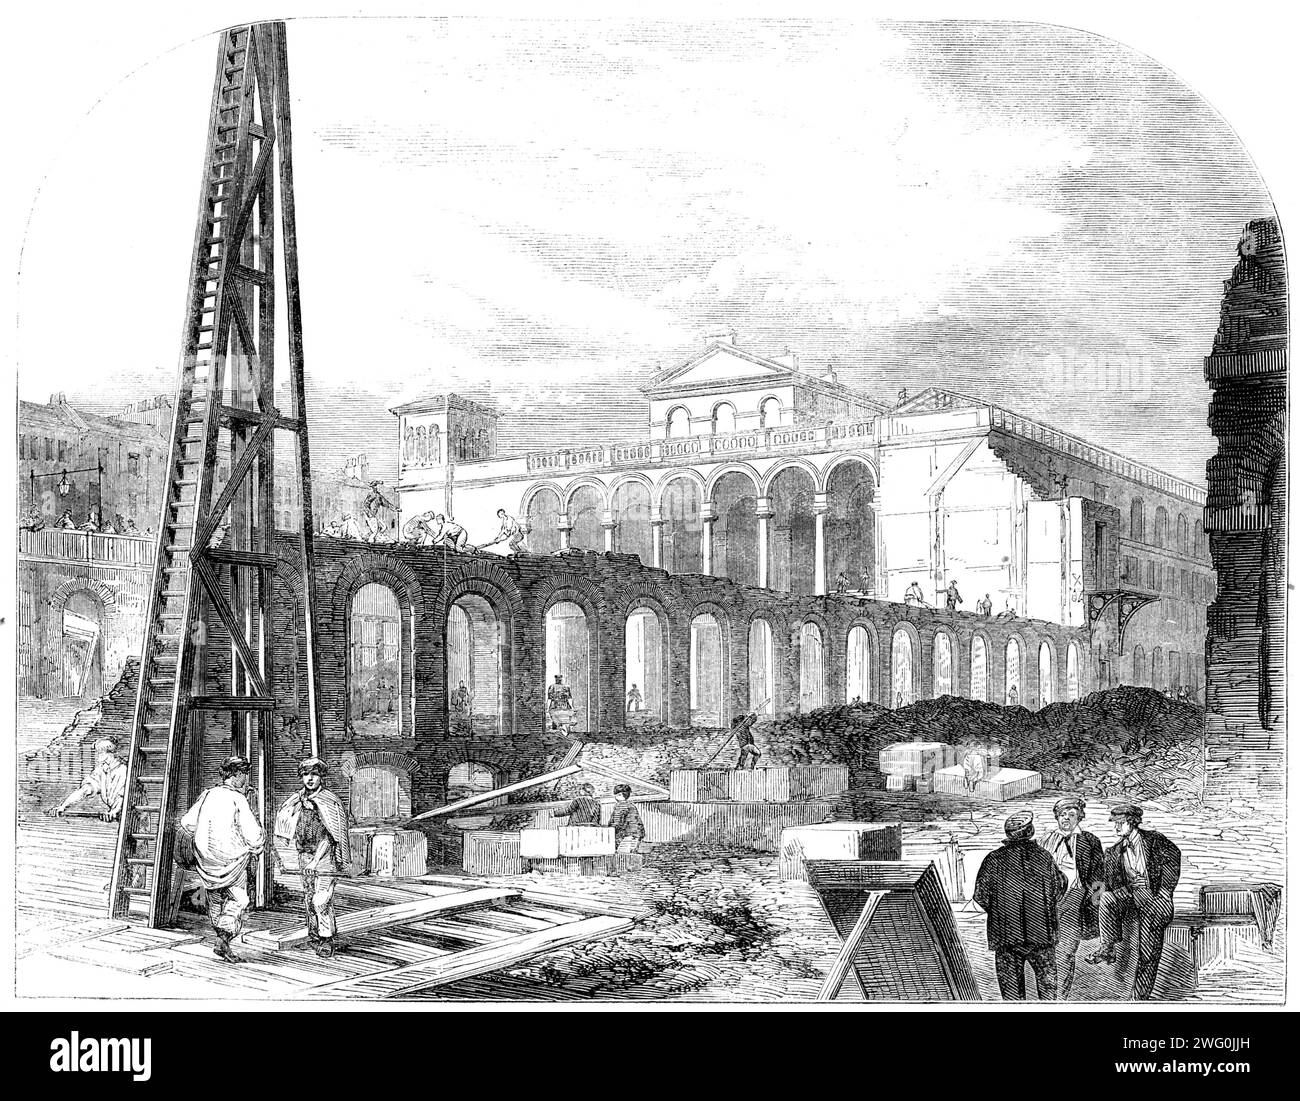 Demolition of Hungerford Market to make room for the Charing-Cross Railway Station, [London], 1862. 'Our View is taken from the lower end of Villiers-street, where access is at present obtainable to the steam-boat pier. These ruins present a singular aspect: fragments of brickwork, half-opened vaults, with here and there broken flights of stairs leading to them, and prostrate pillars, give one the notion of a young earthquake having been at play here. The works of the new railway-bridge are so rapidly approaching the shore as to call for the immediate destruction of the market. The first porti Stock Photo